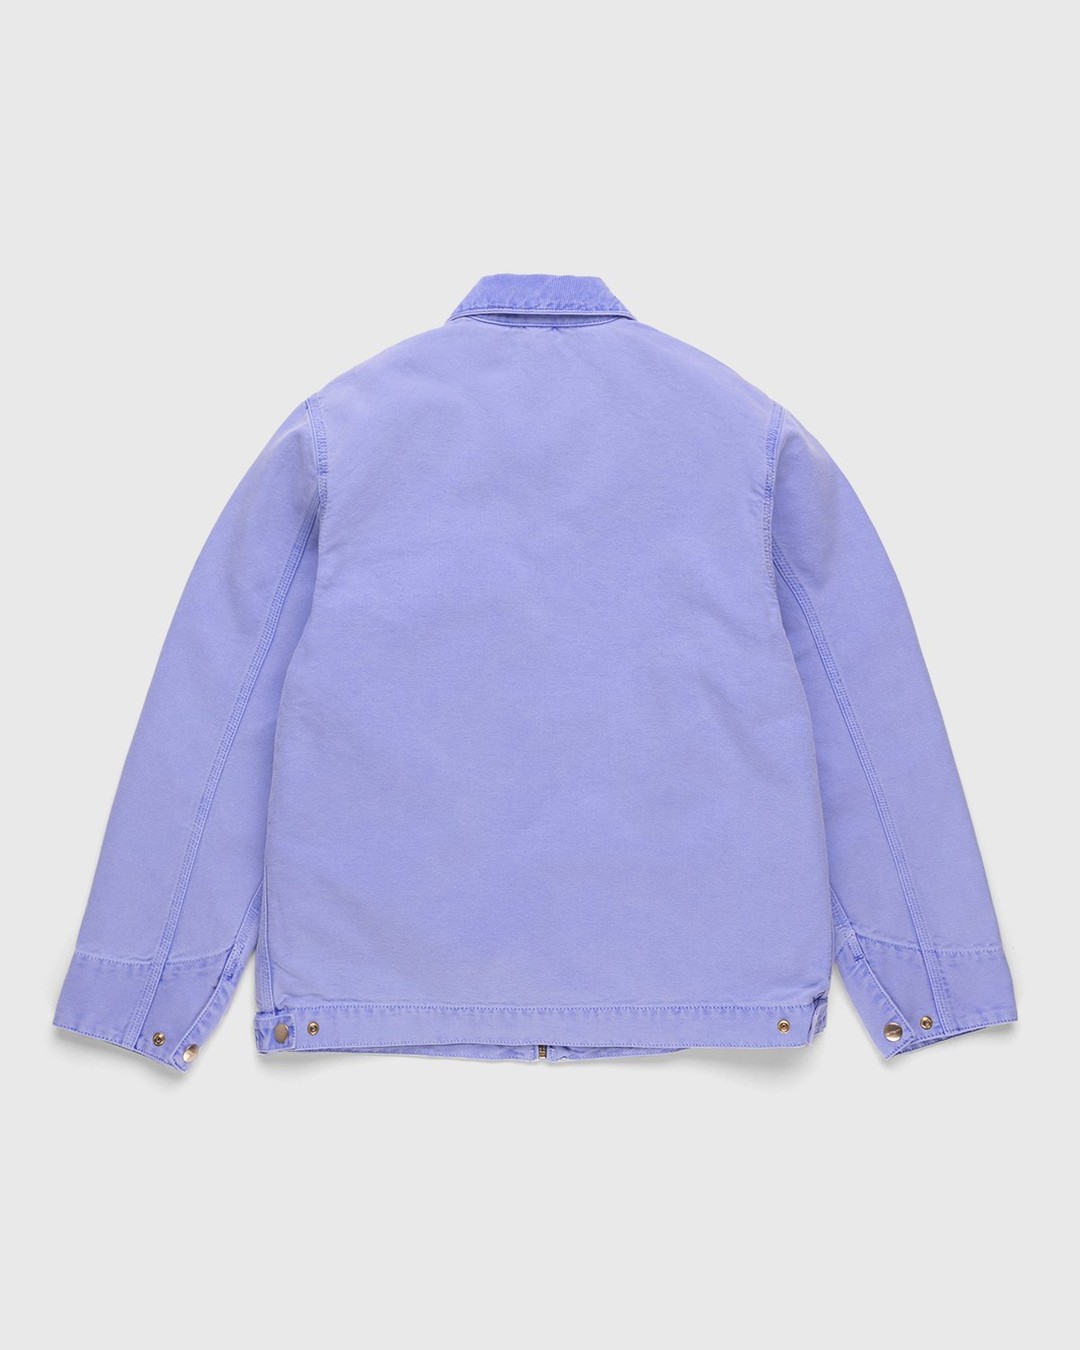 Carhartt WIP – Detroit Jacket Icy Water Faded - Jackets - Blue - Image 2